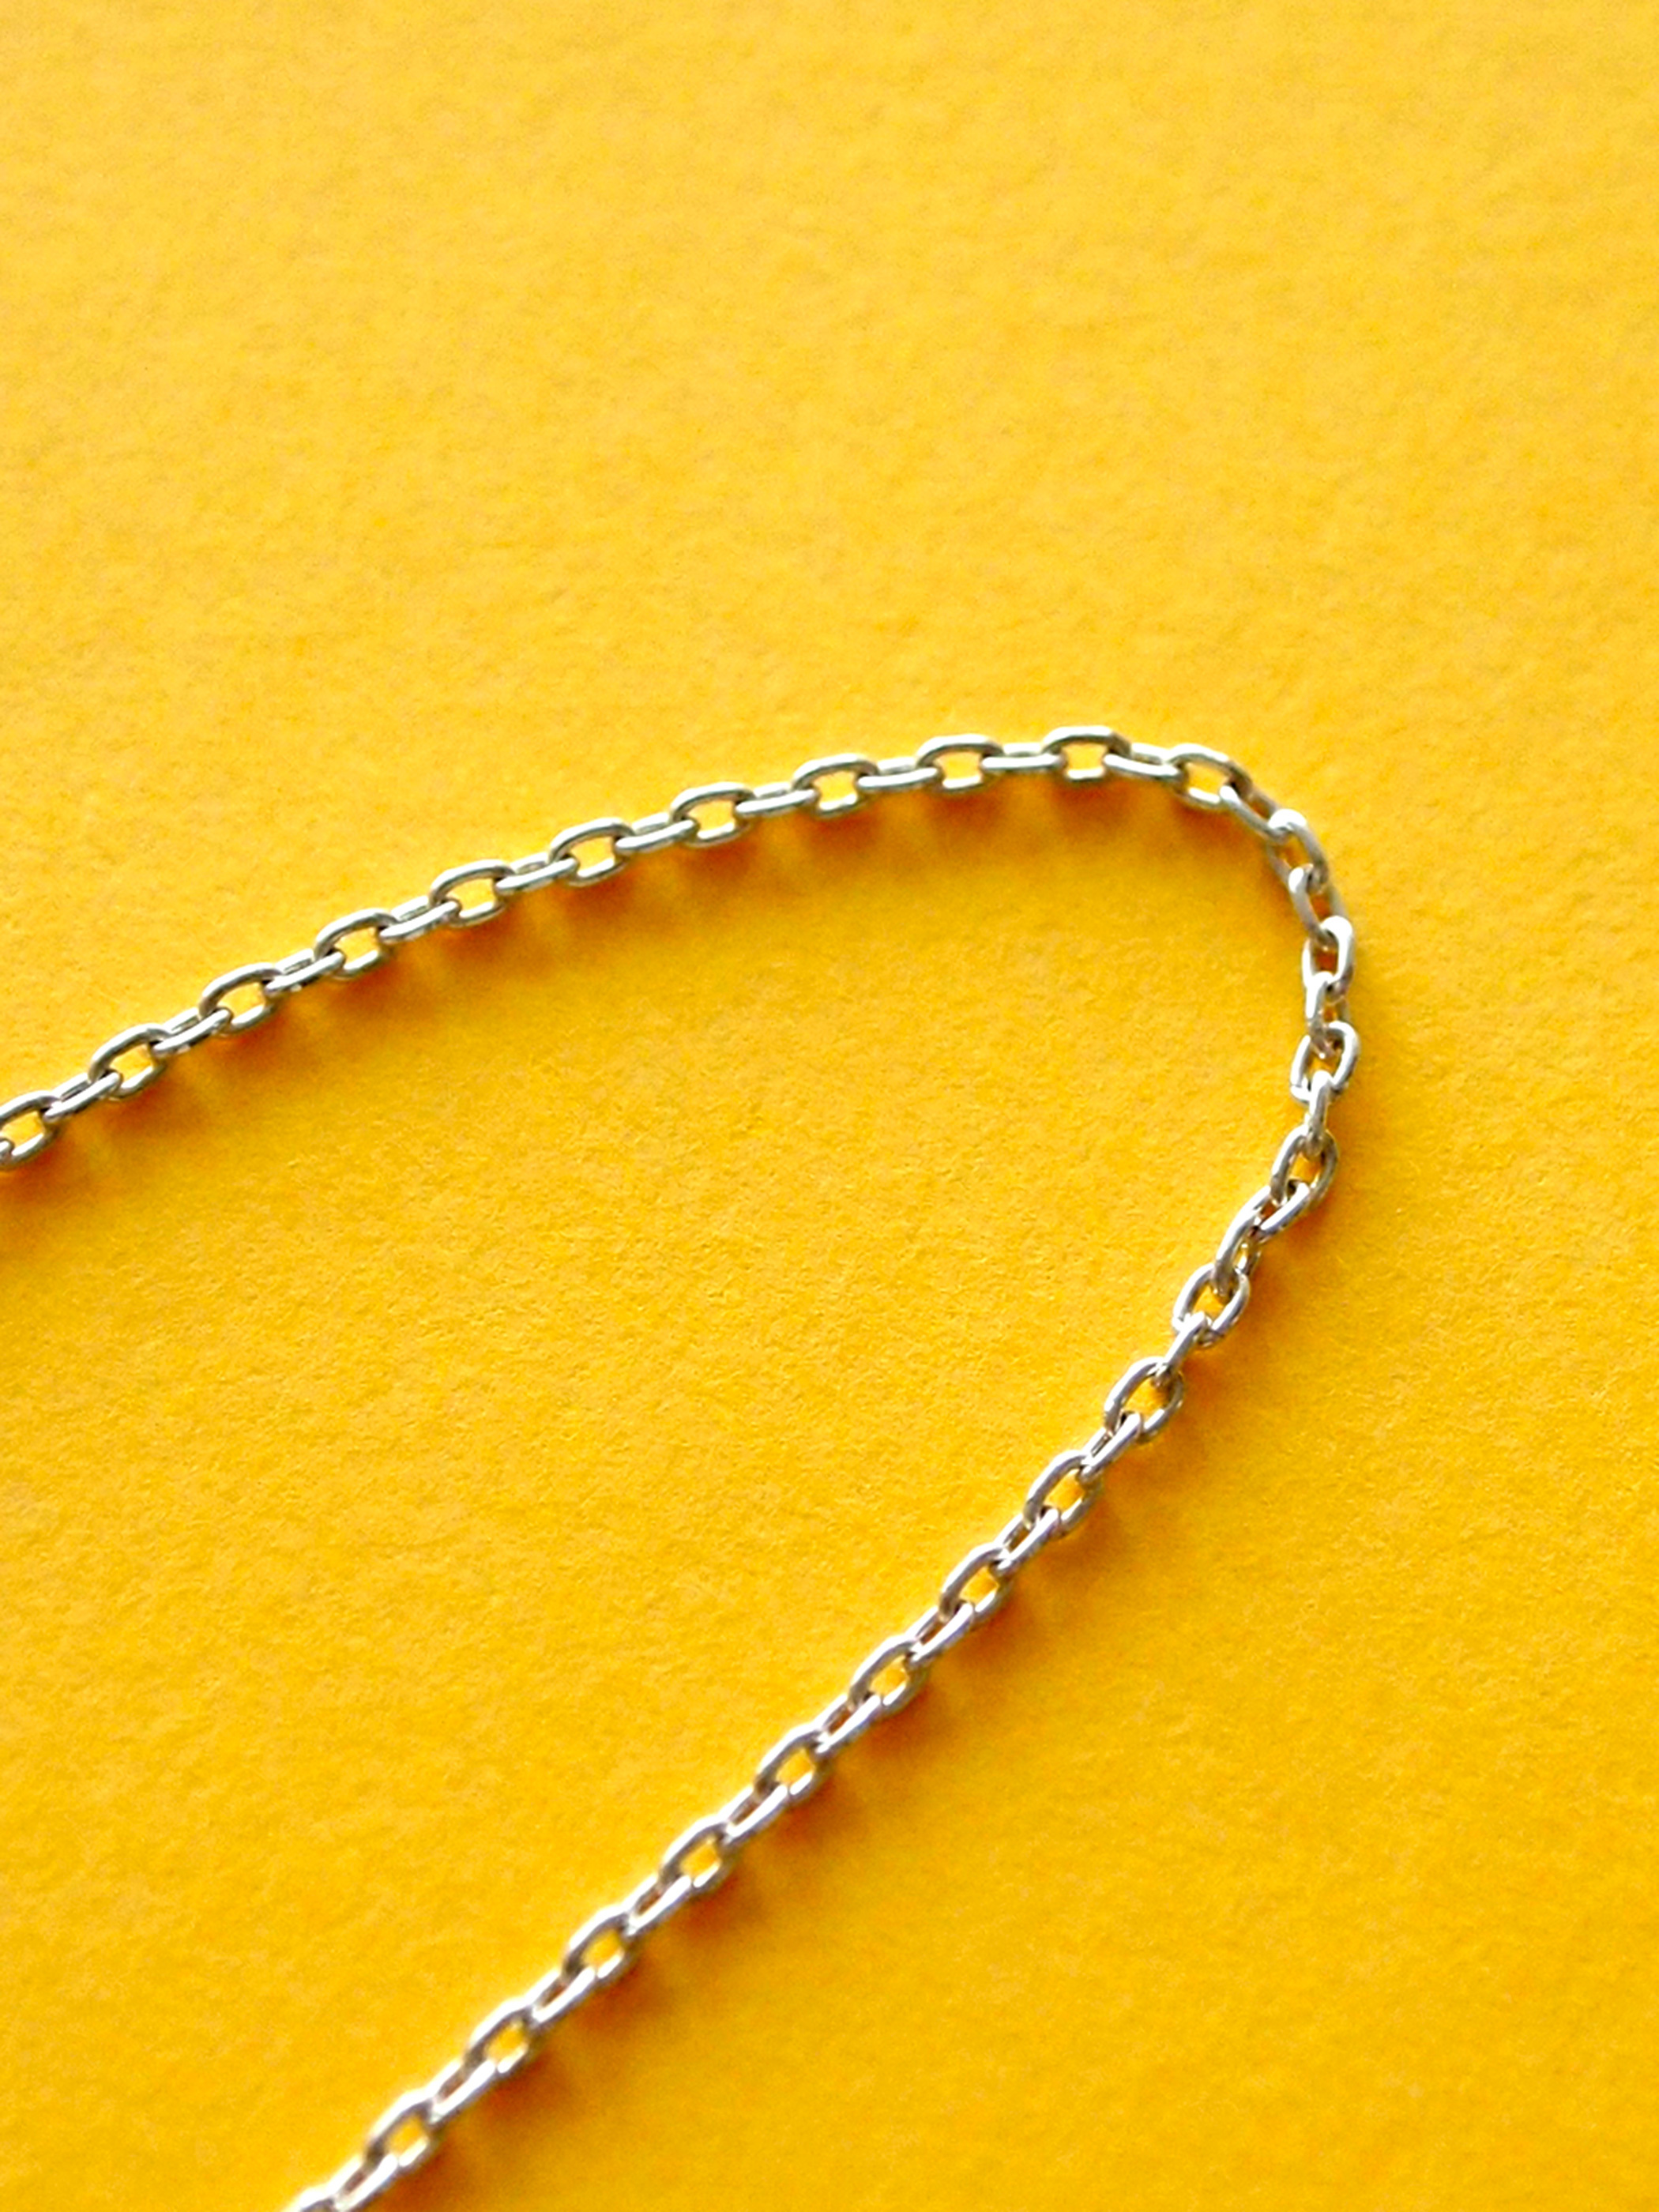 2.0mm short Link Silver Chain